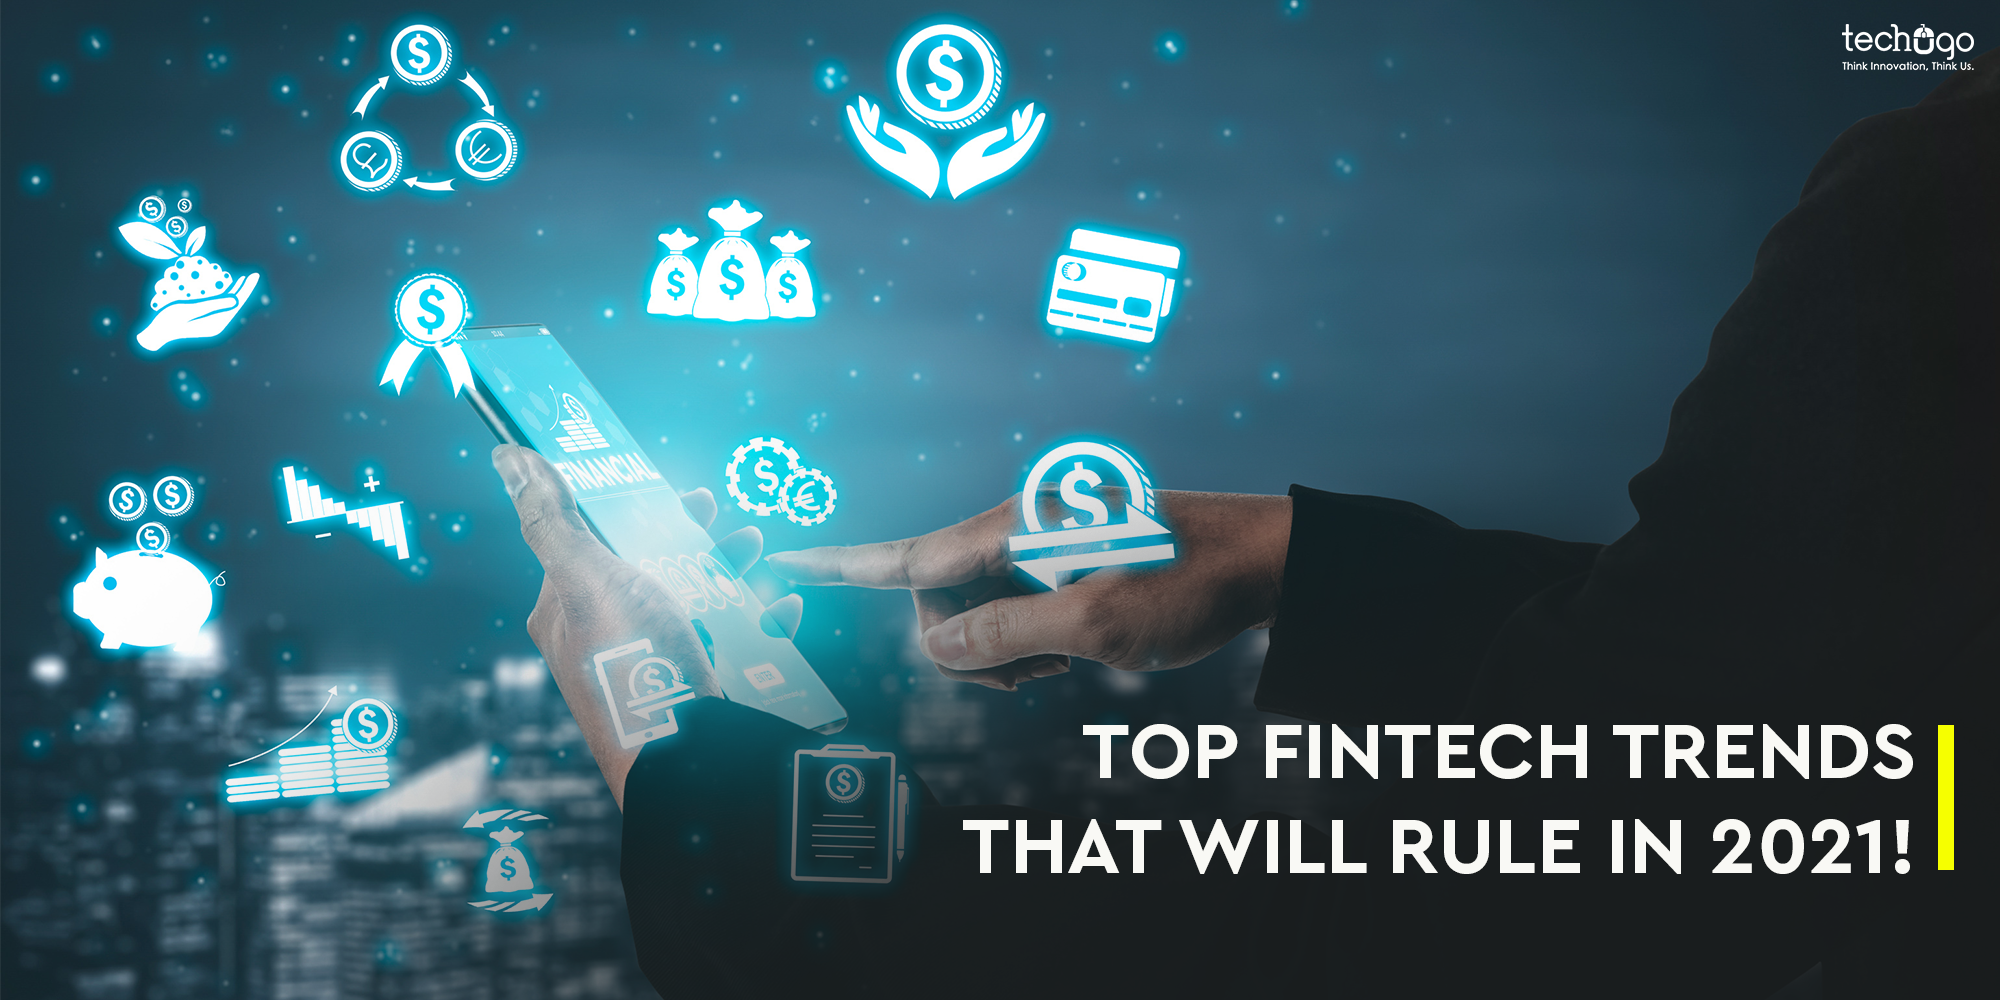 Top Fintech Trends That Will Rule In 2021!